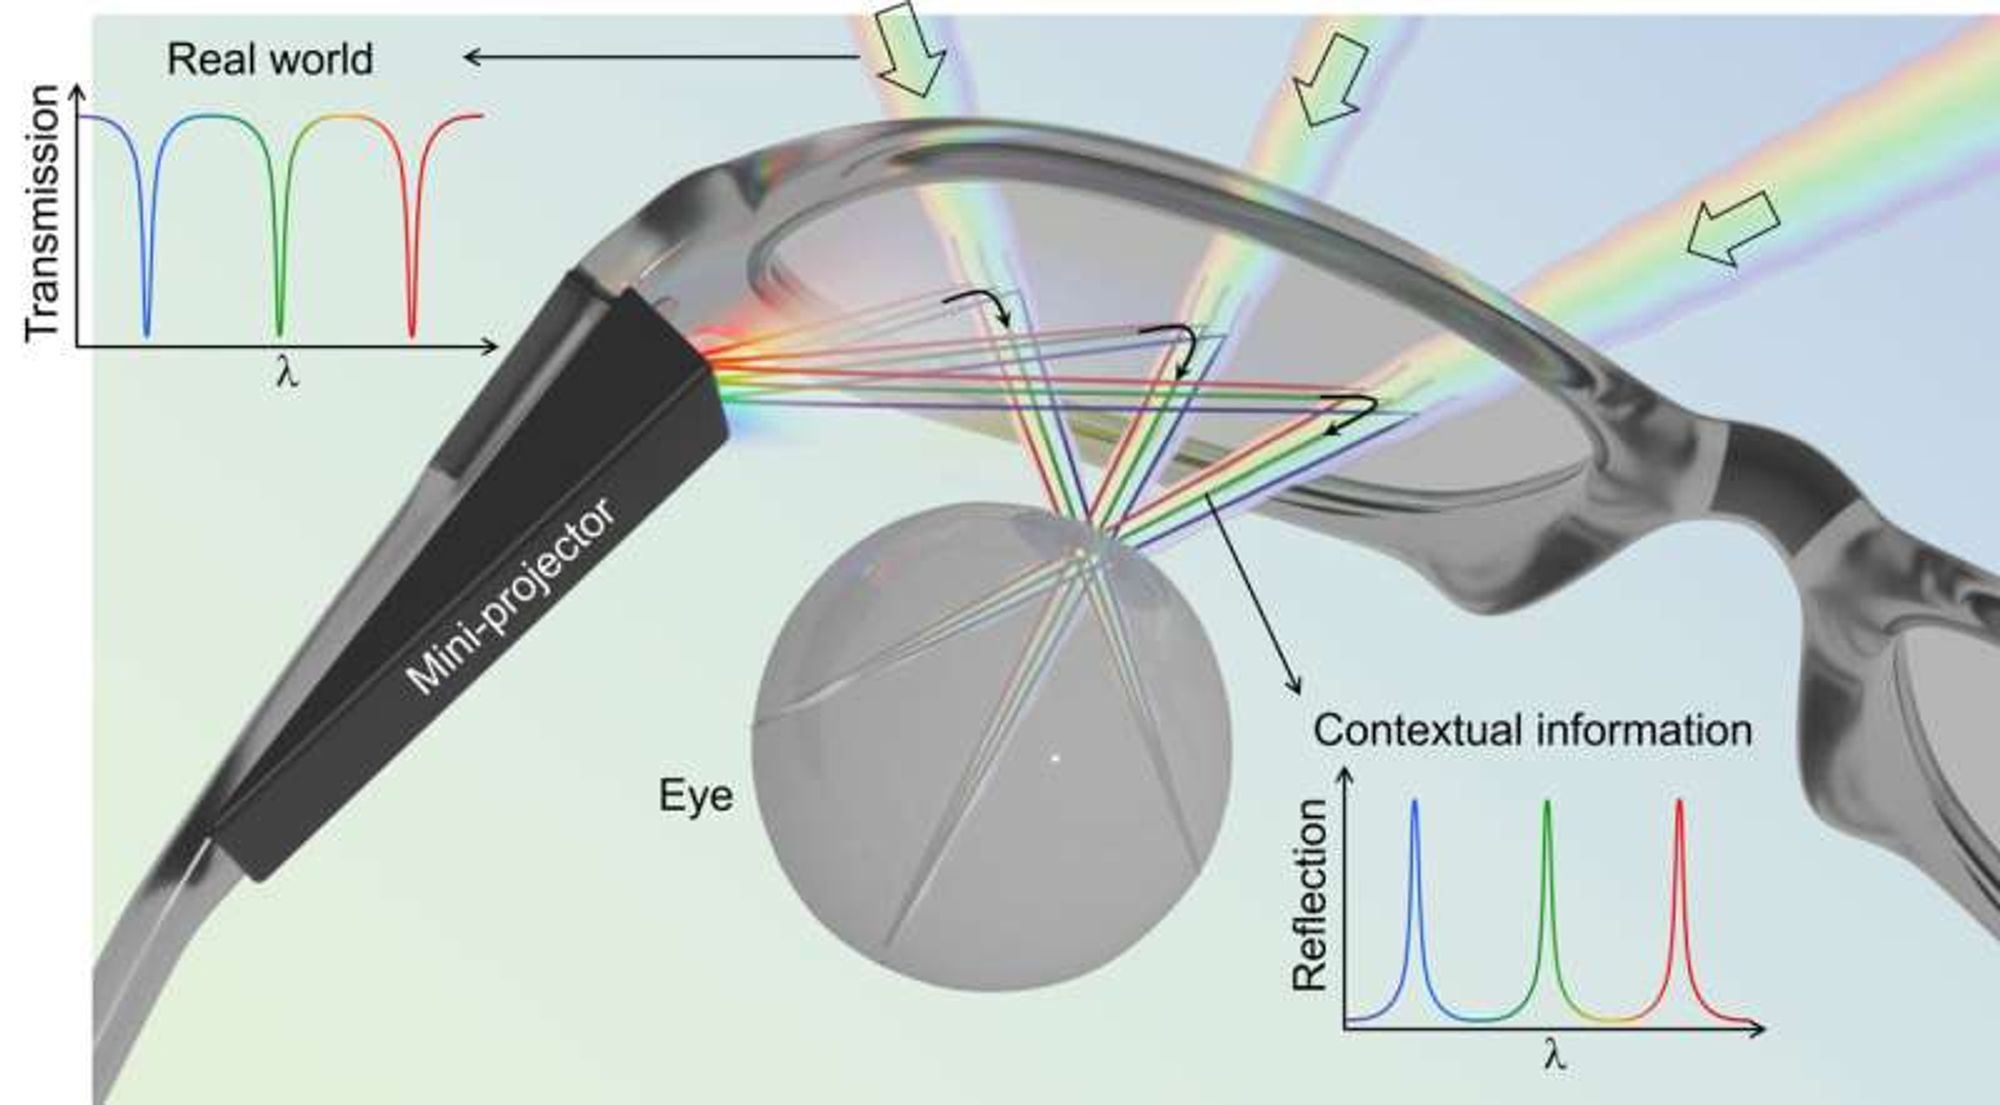 'Optical magic': New flat glass enables optimal visual quality for augmented reality goggles